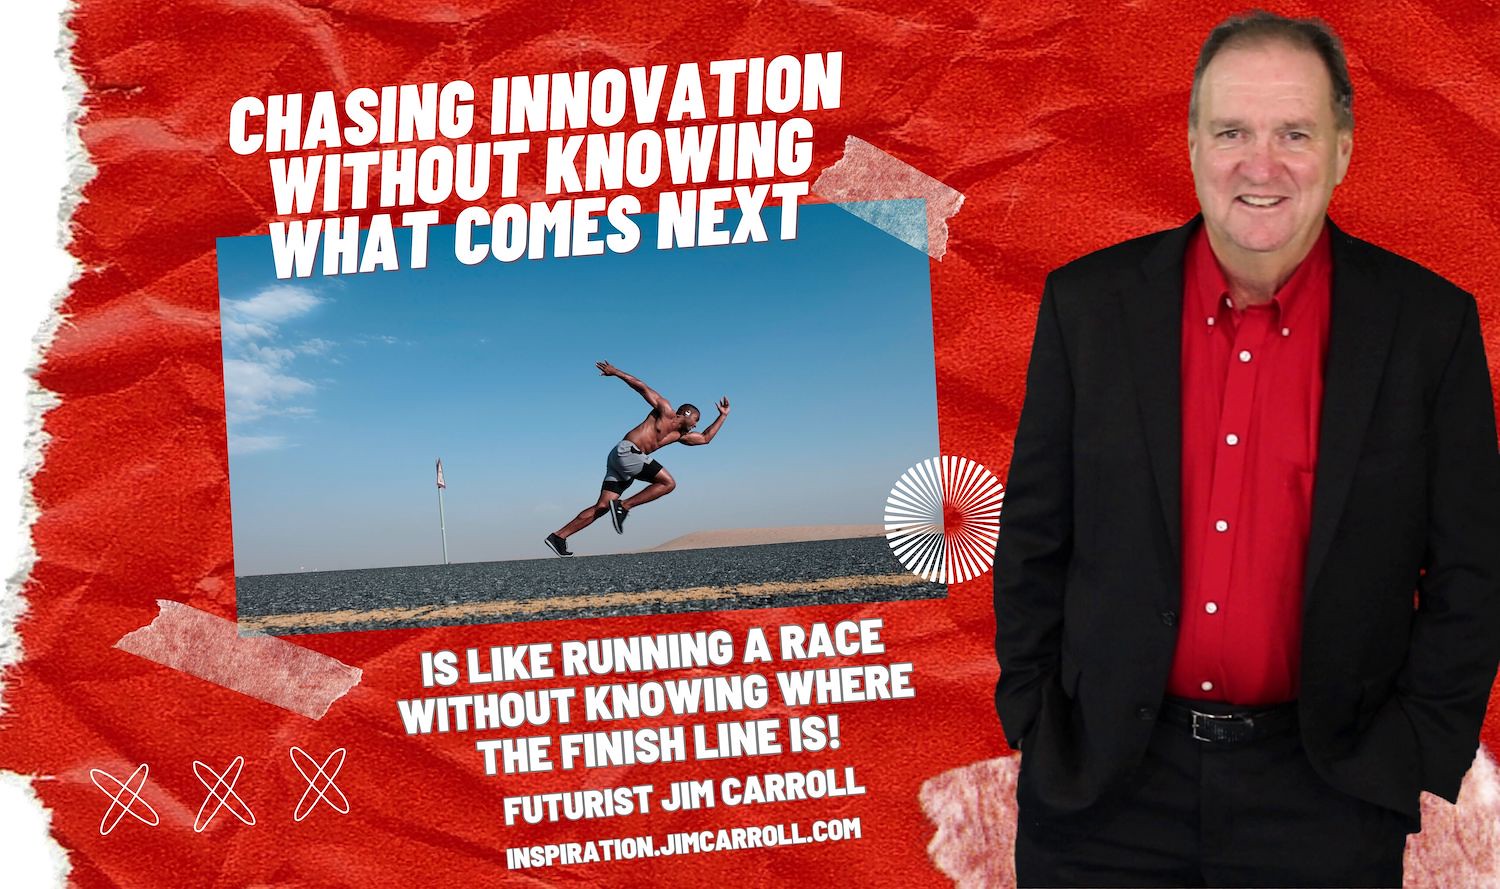 "Chasing innovation without knowing what comes next is like running a race without knowing where the finish line is!" - Futurist Jim Carroll